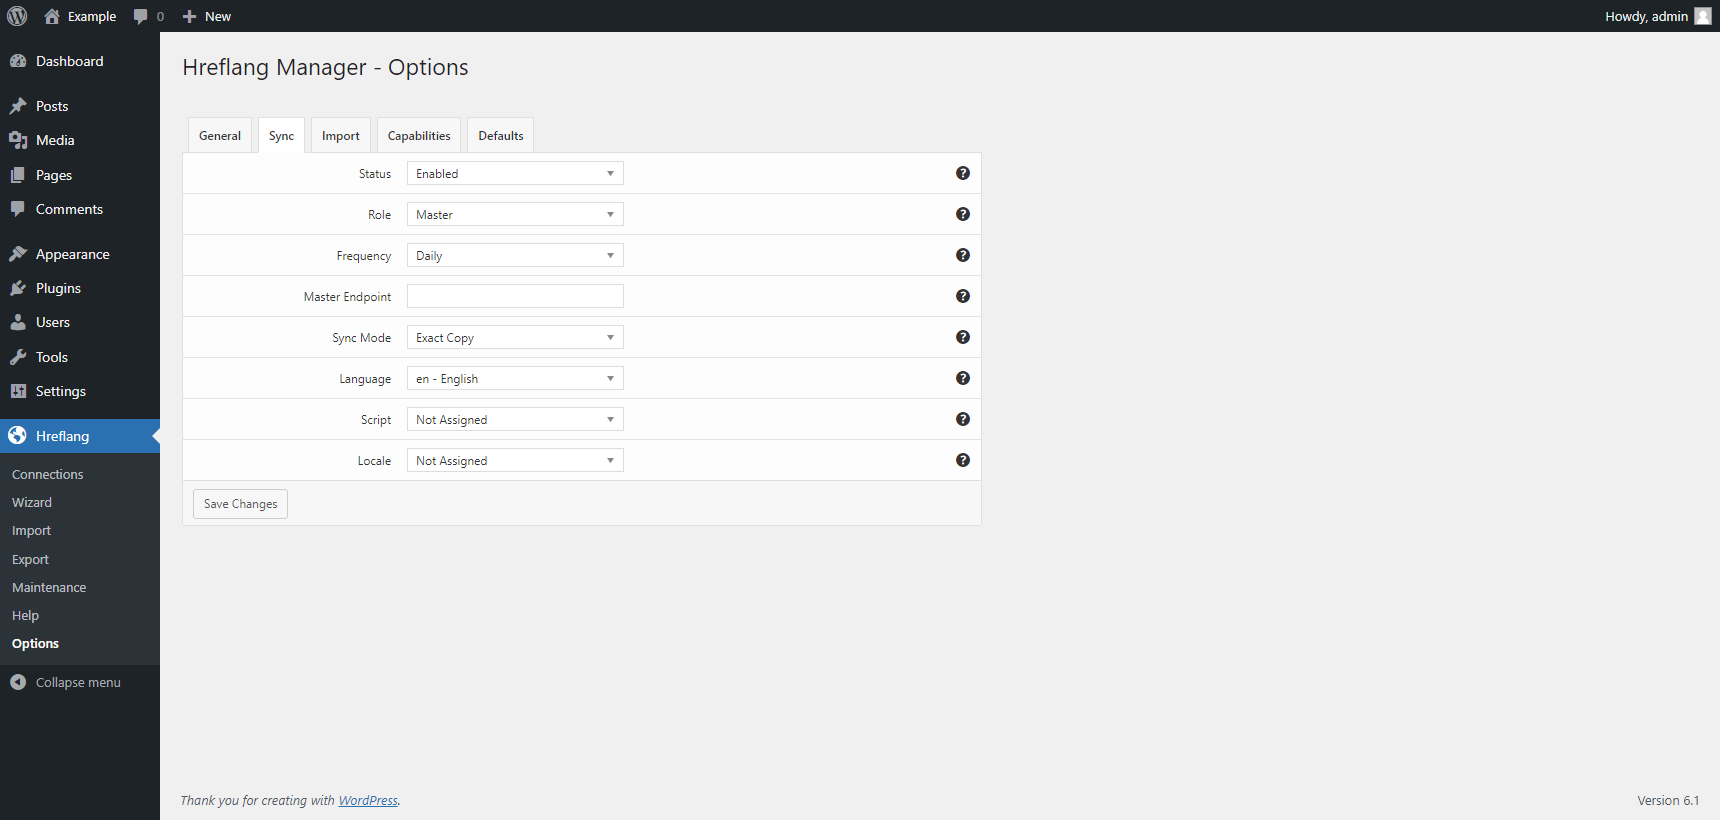 "Sync" tab in the plugin options of the Hreflang Manager plugin for WordPress.